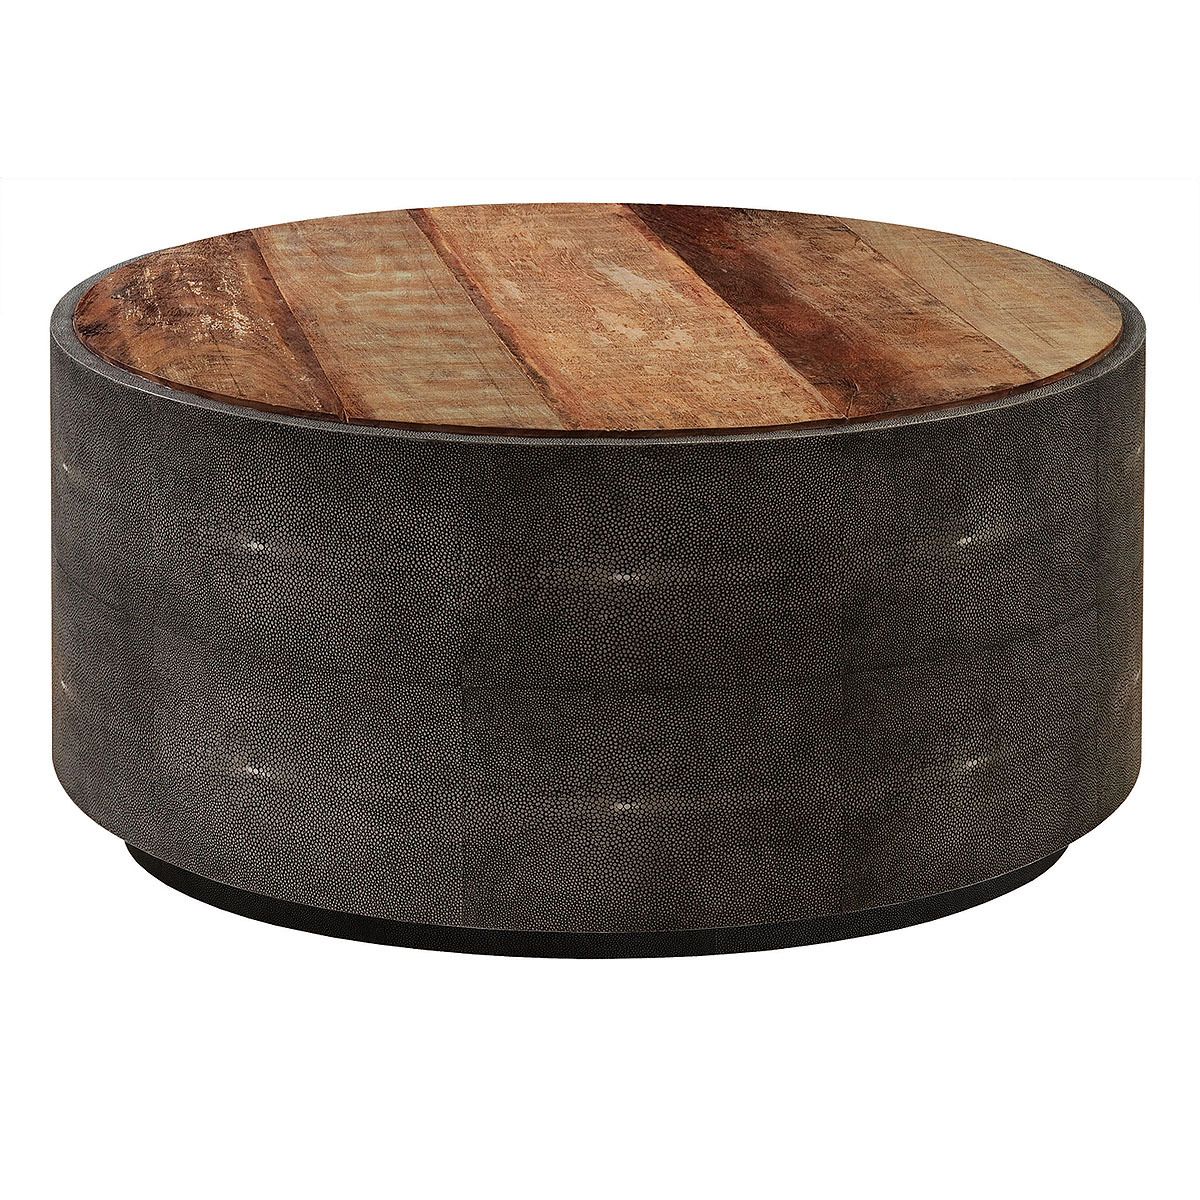 Round 38 Inch Reclaimed Wood Coffee Table Round Wooden Coffee Table End Tables For Living Room Small Round Coffee Table (View 6 of 10)